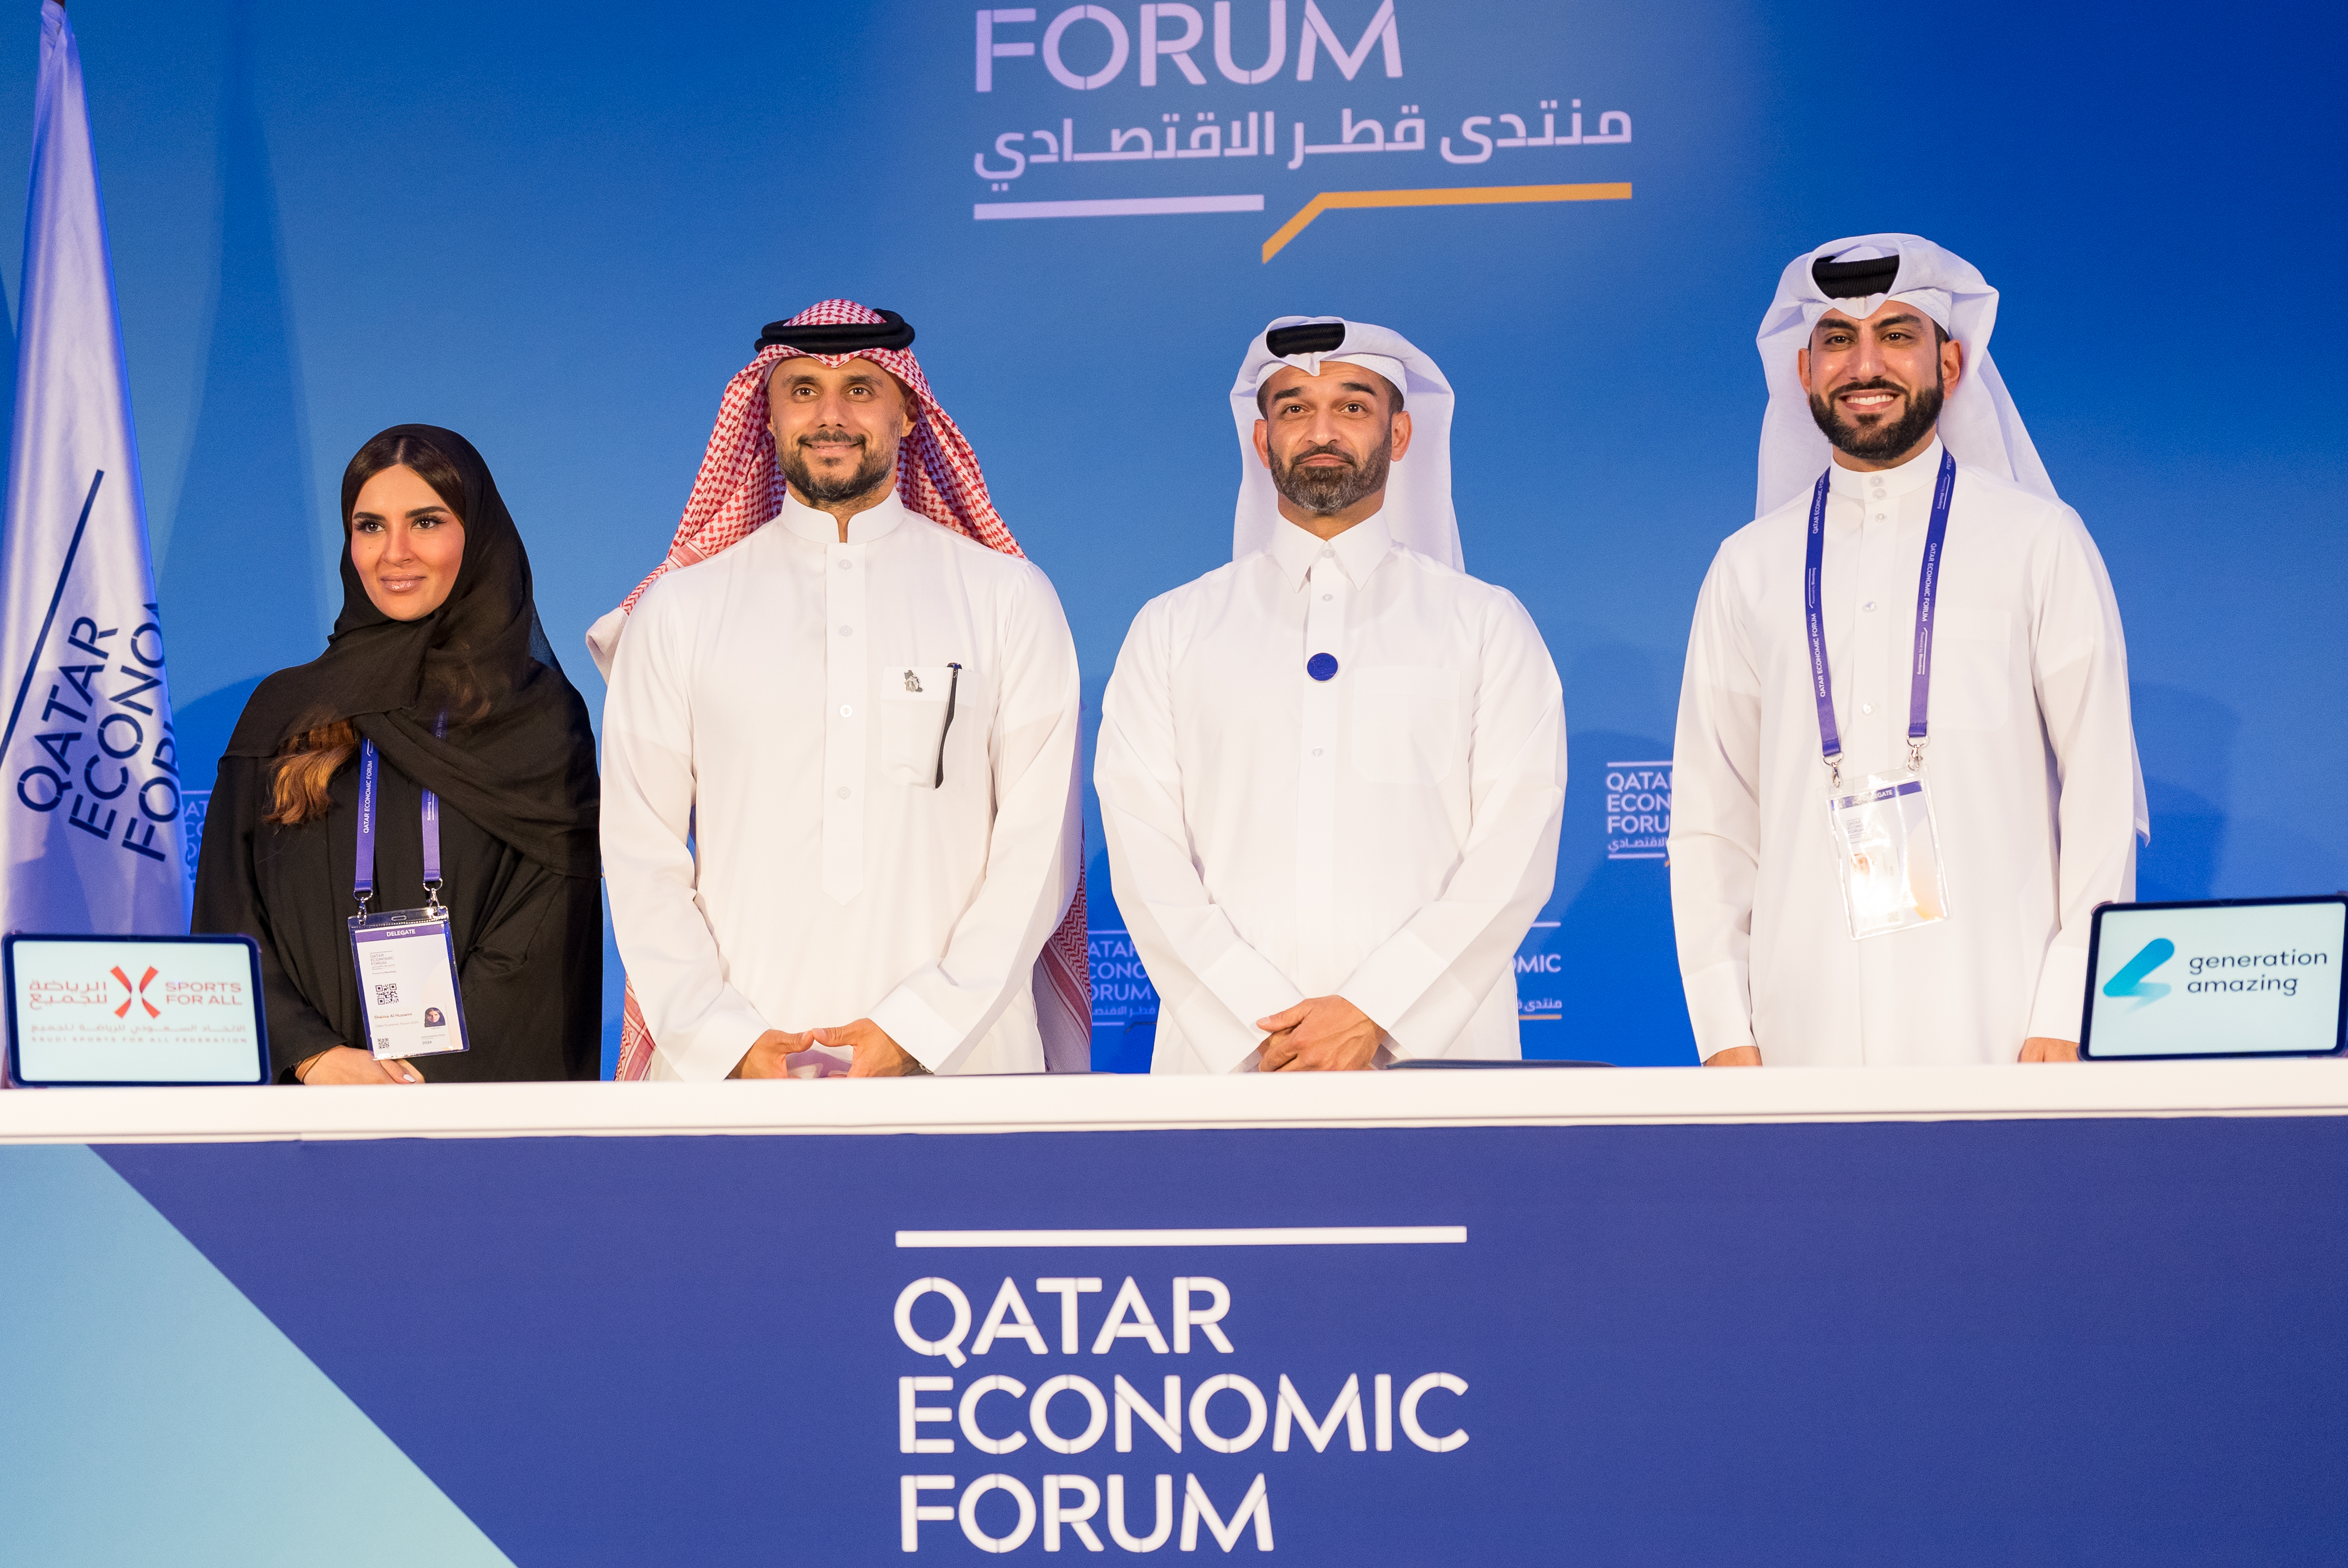 Generation Amazing Foundation Signs MoU with Saudi Sports for All Federation at Qatar Economic Forum